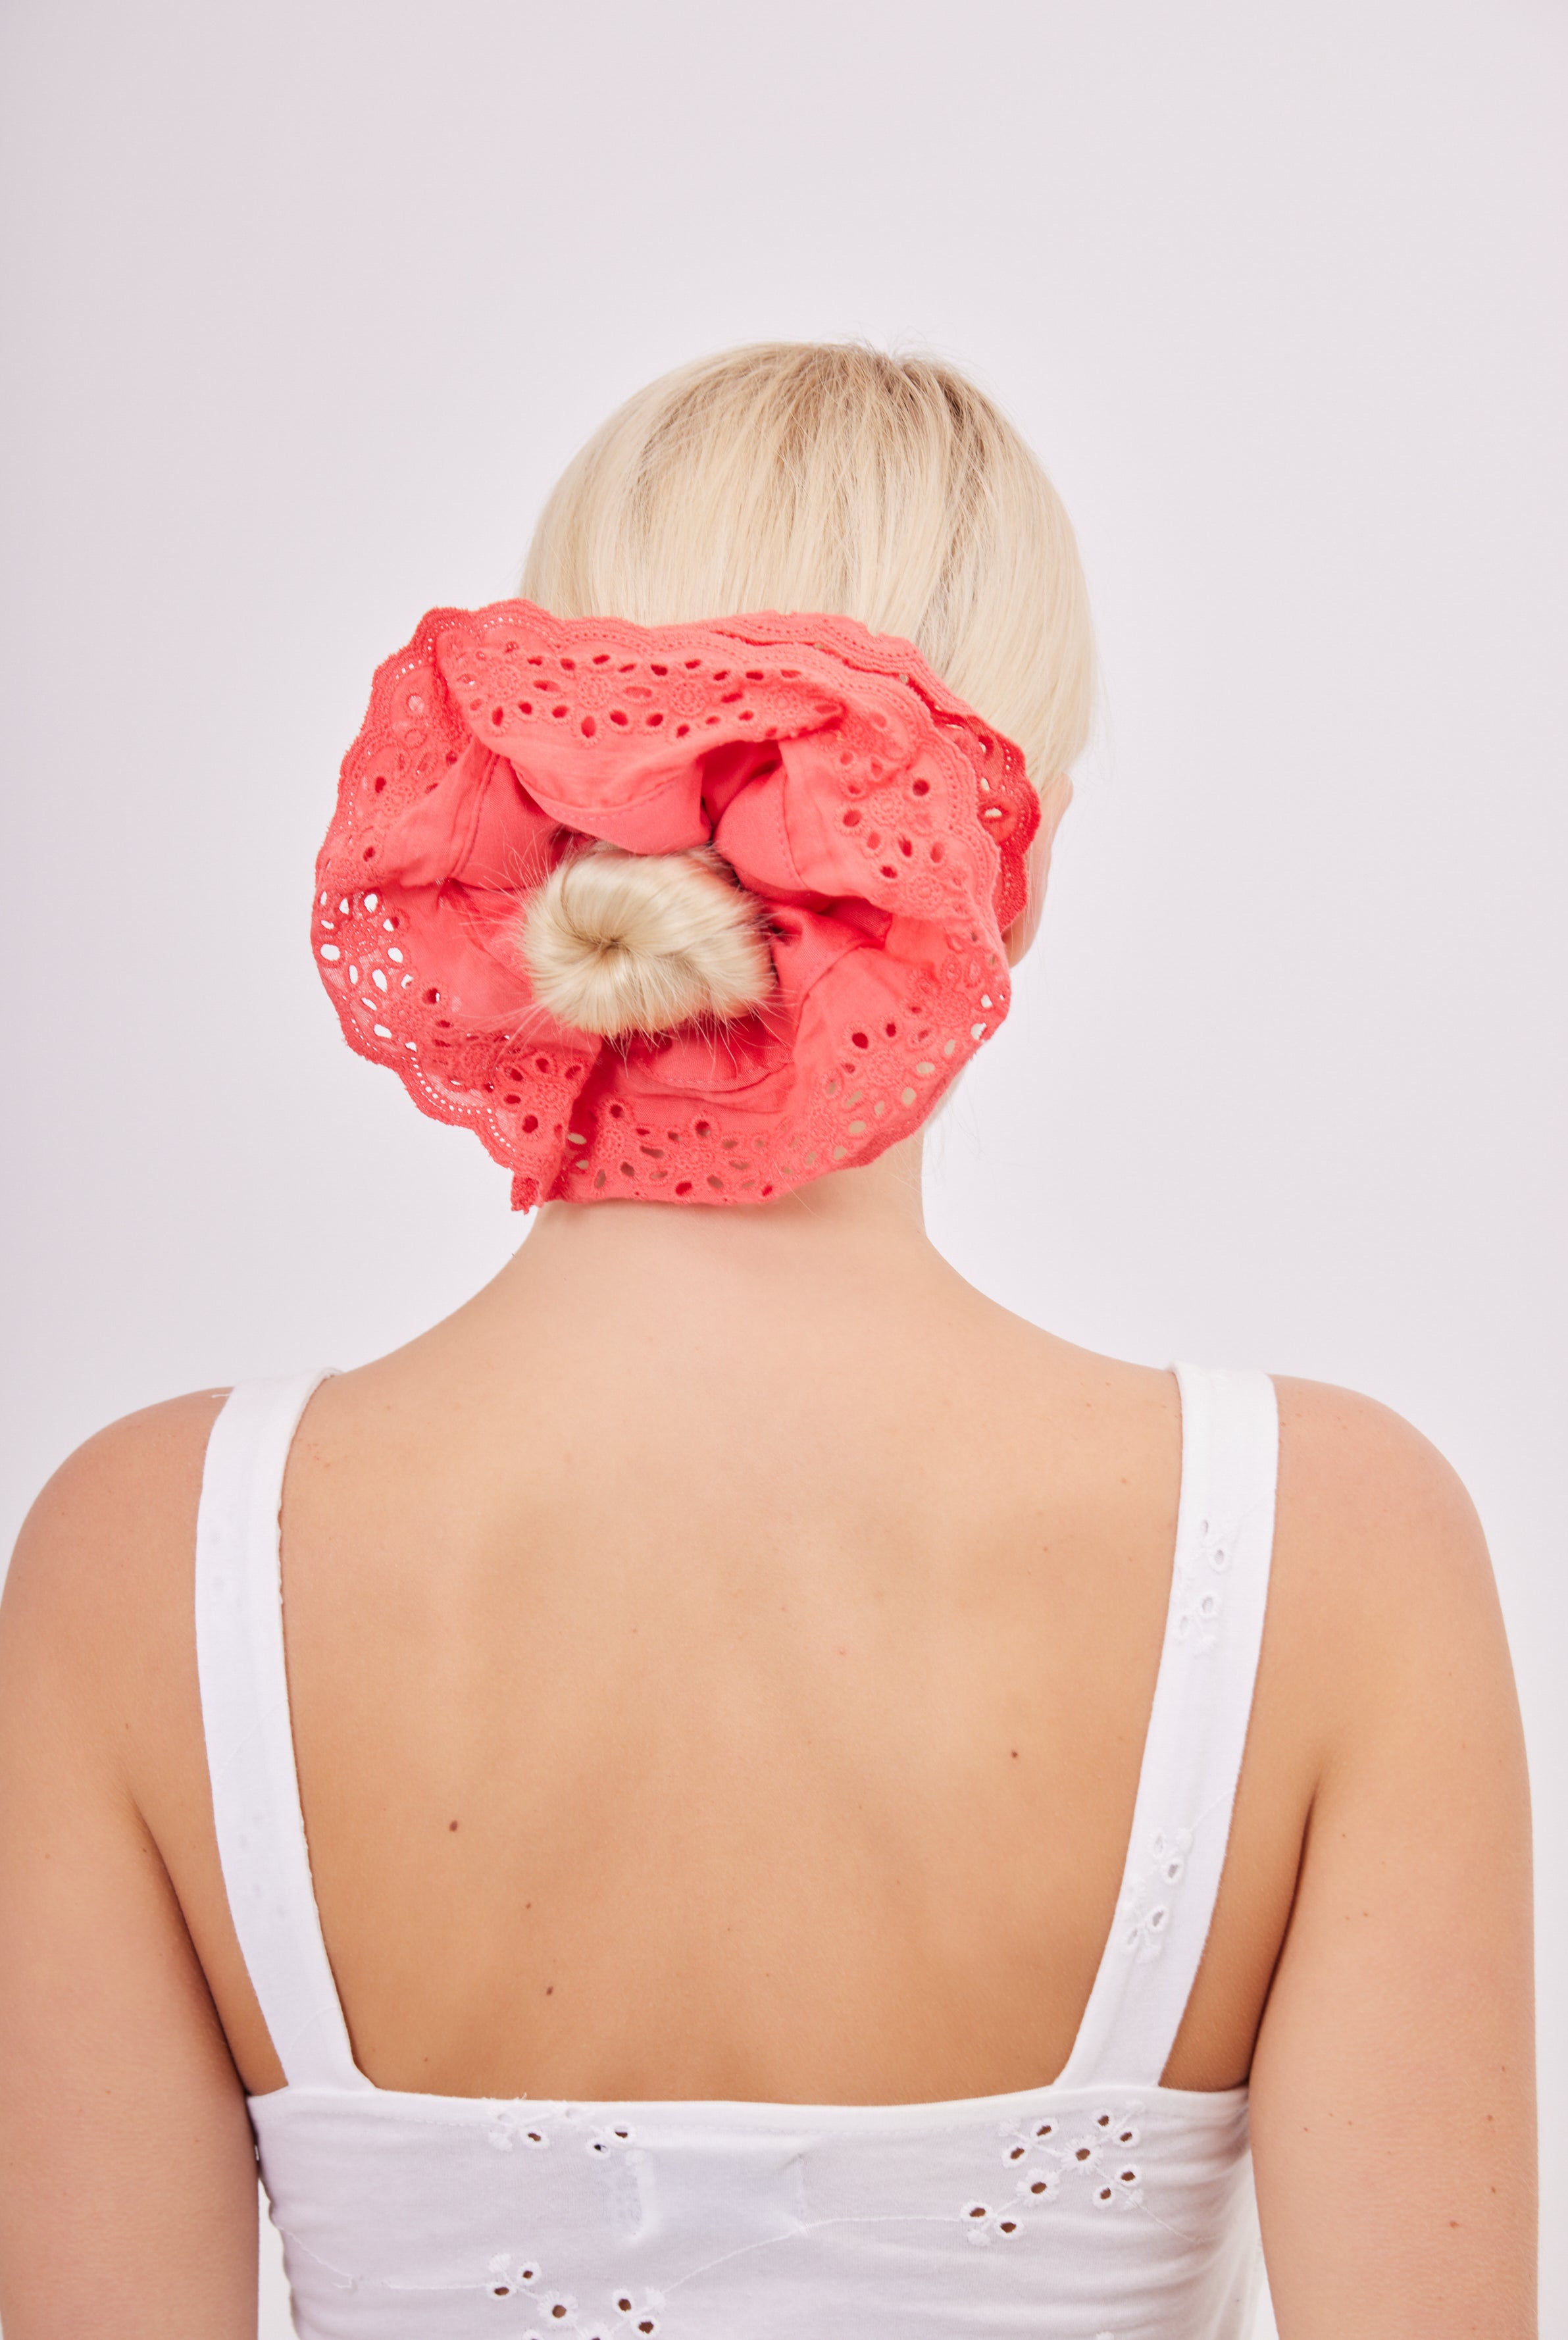 Oversized Frill Lace Scrunchie in Red  | tomato girl | tomato girl hair accessories | tomato girl scrunchie | oversized scrunchie | broderie scrunchie | lolita hair accessories | lolita scrunchie | women's hair accessories | women's scrunchie | holiday hair accessories | beach hair accessories | summer hair accessories | red hair accessories  